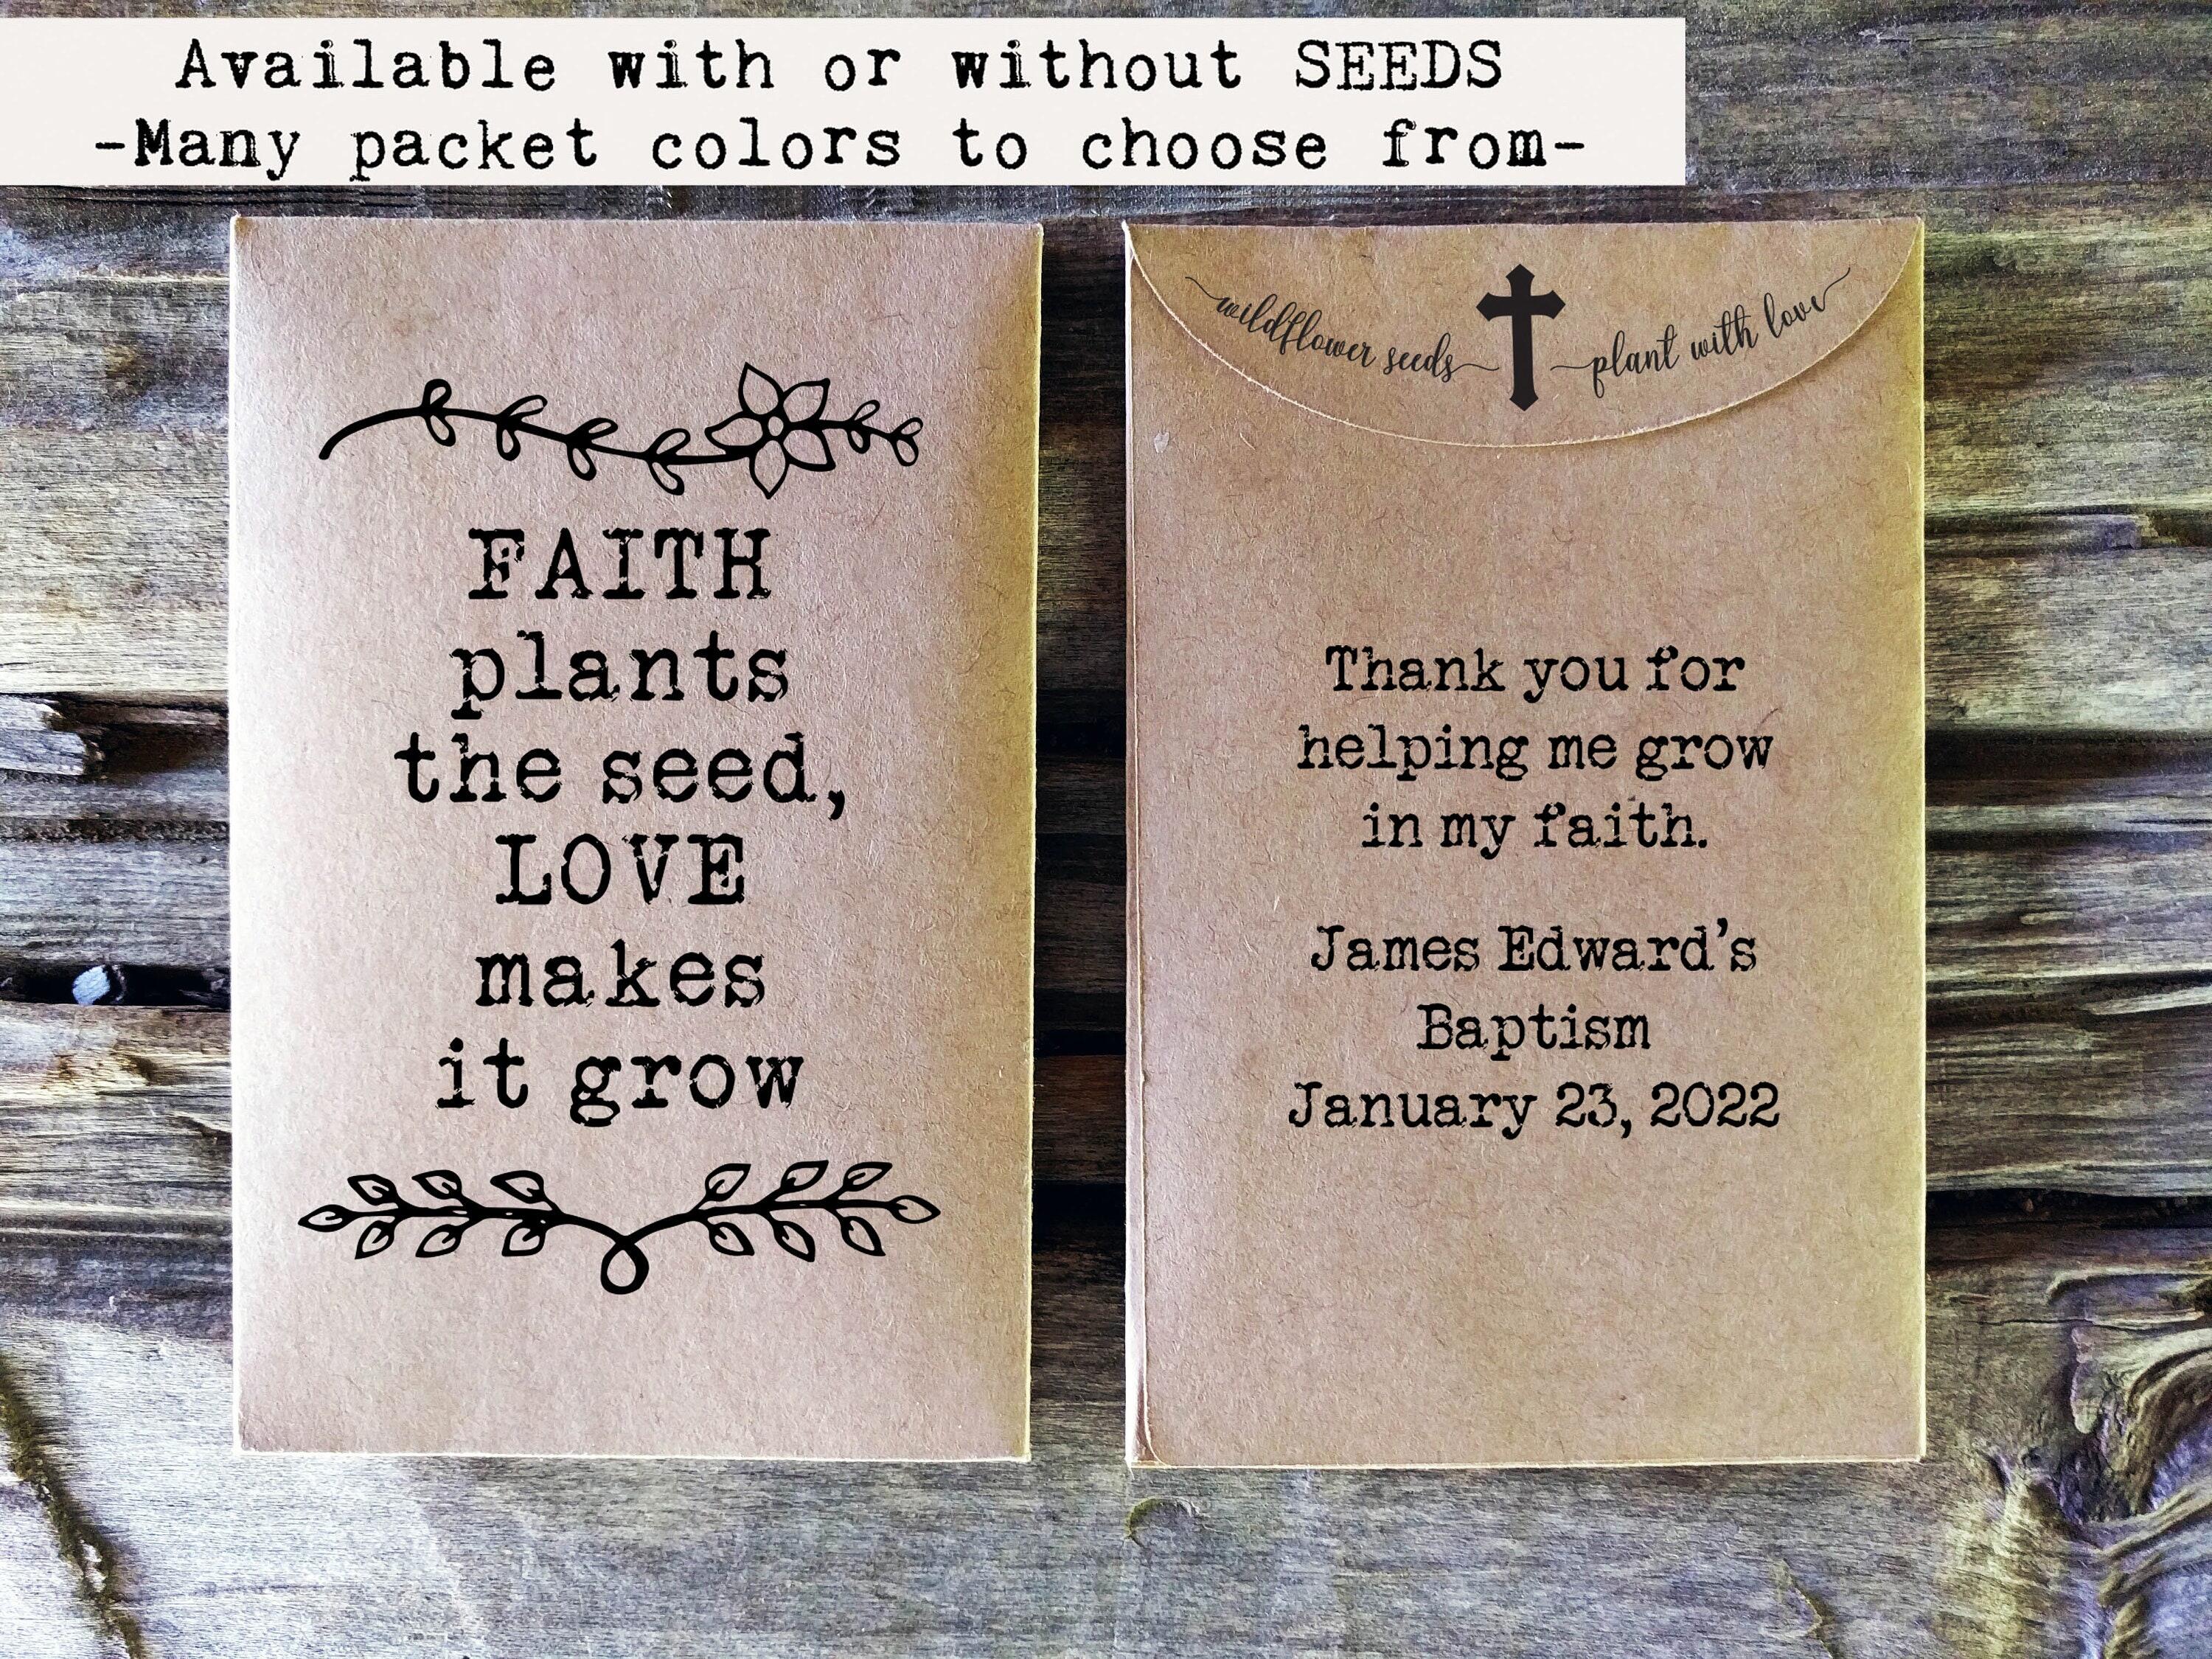 Christian Baby Shower Seed Packet Favor, Faith Plants the Seed, Custom  Personalized Seed Packets, Bible Verse Rustic Baby Shower Favor